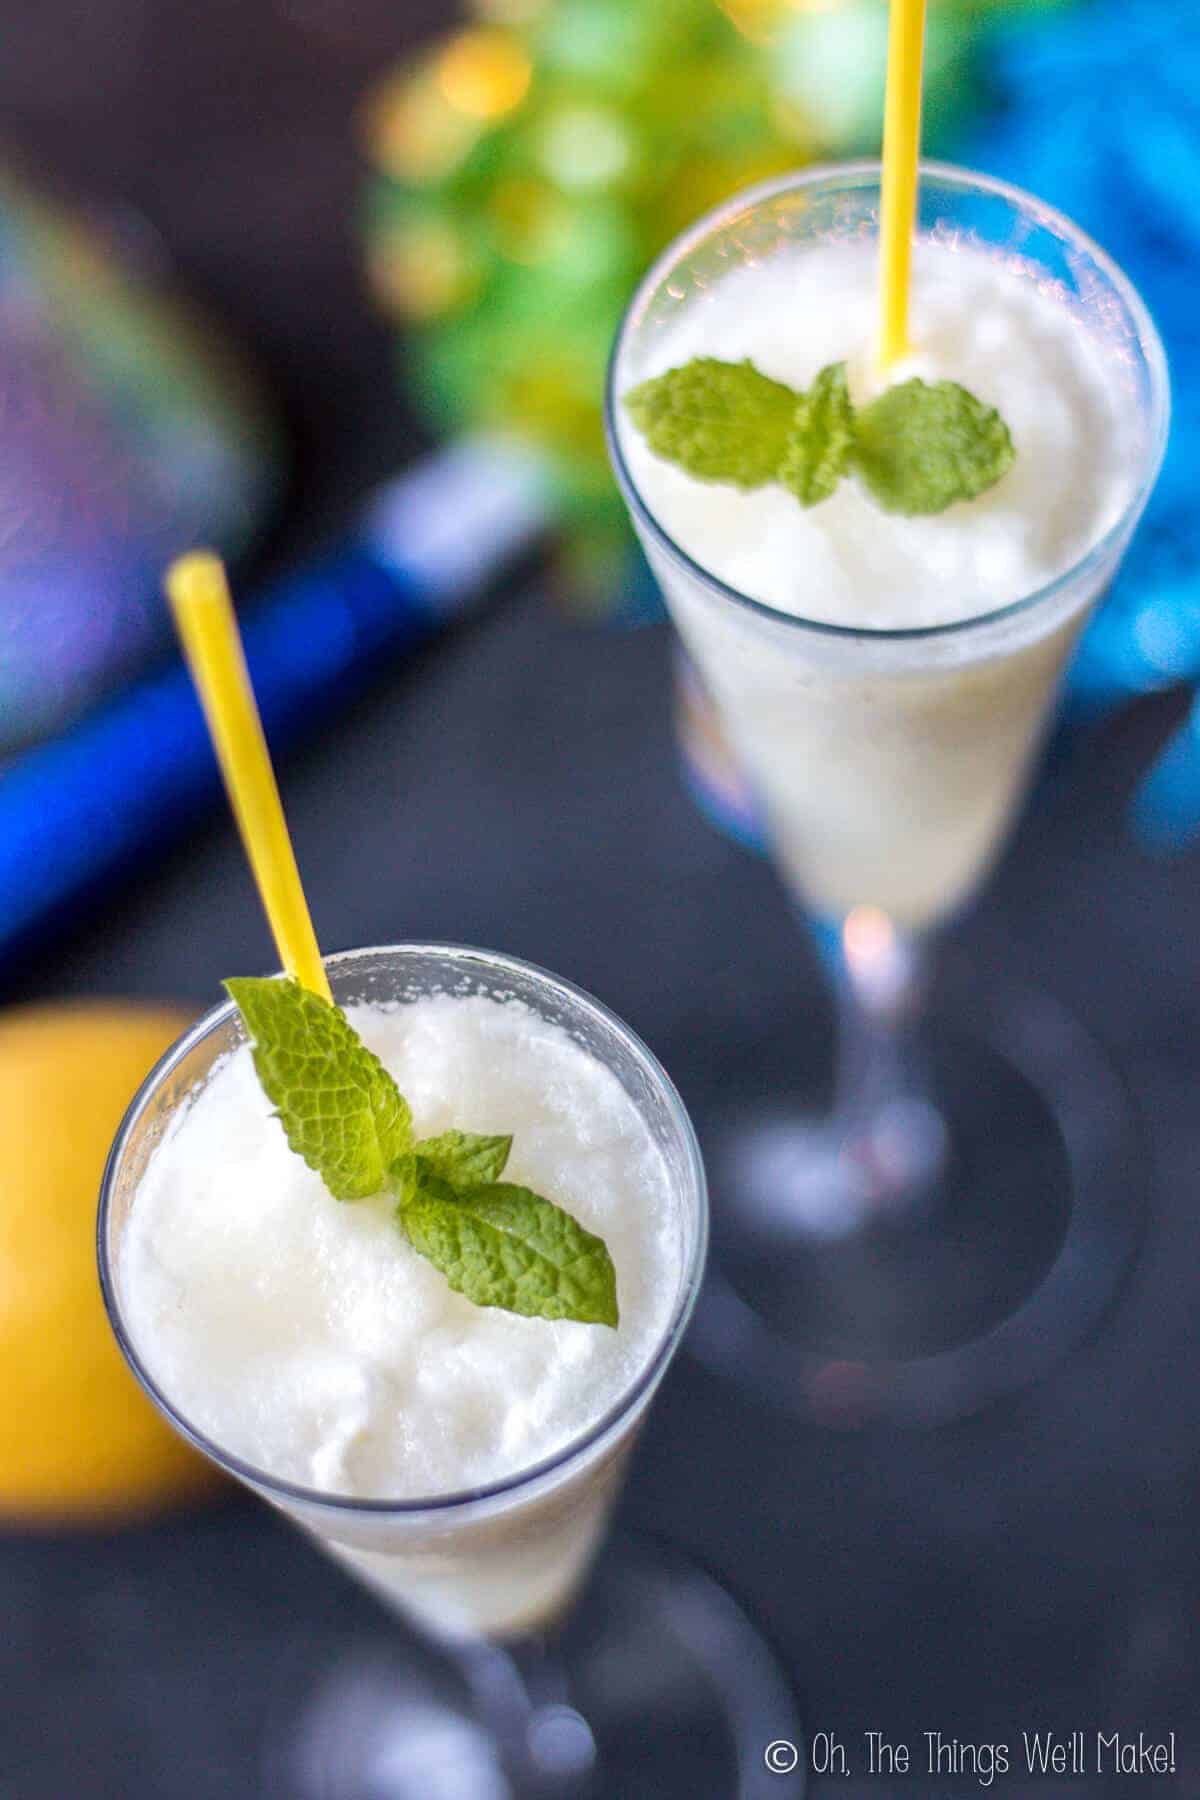 One of Spain's signature desserts, the sorbete de limón al cava, or lemon champagne sorbet, is often served at weddings and fancy restaurants, but is simple enough to easily make at home.